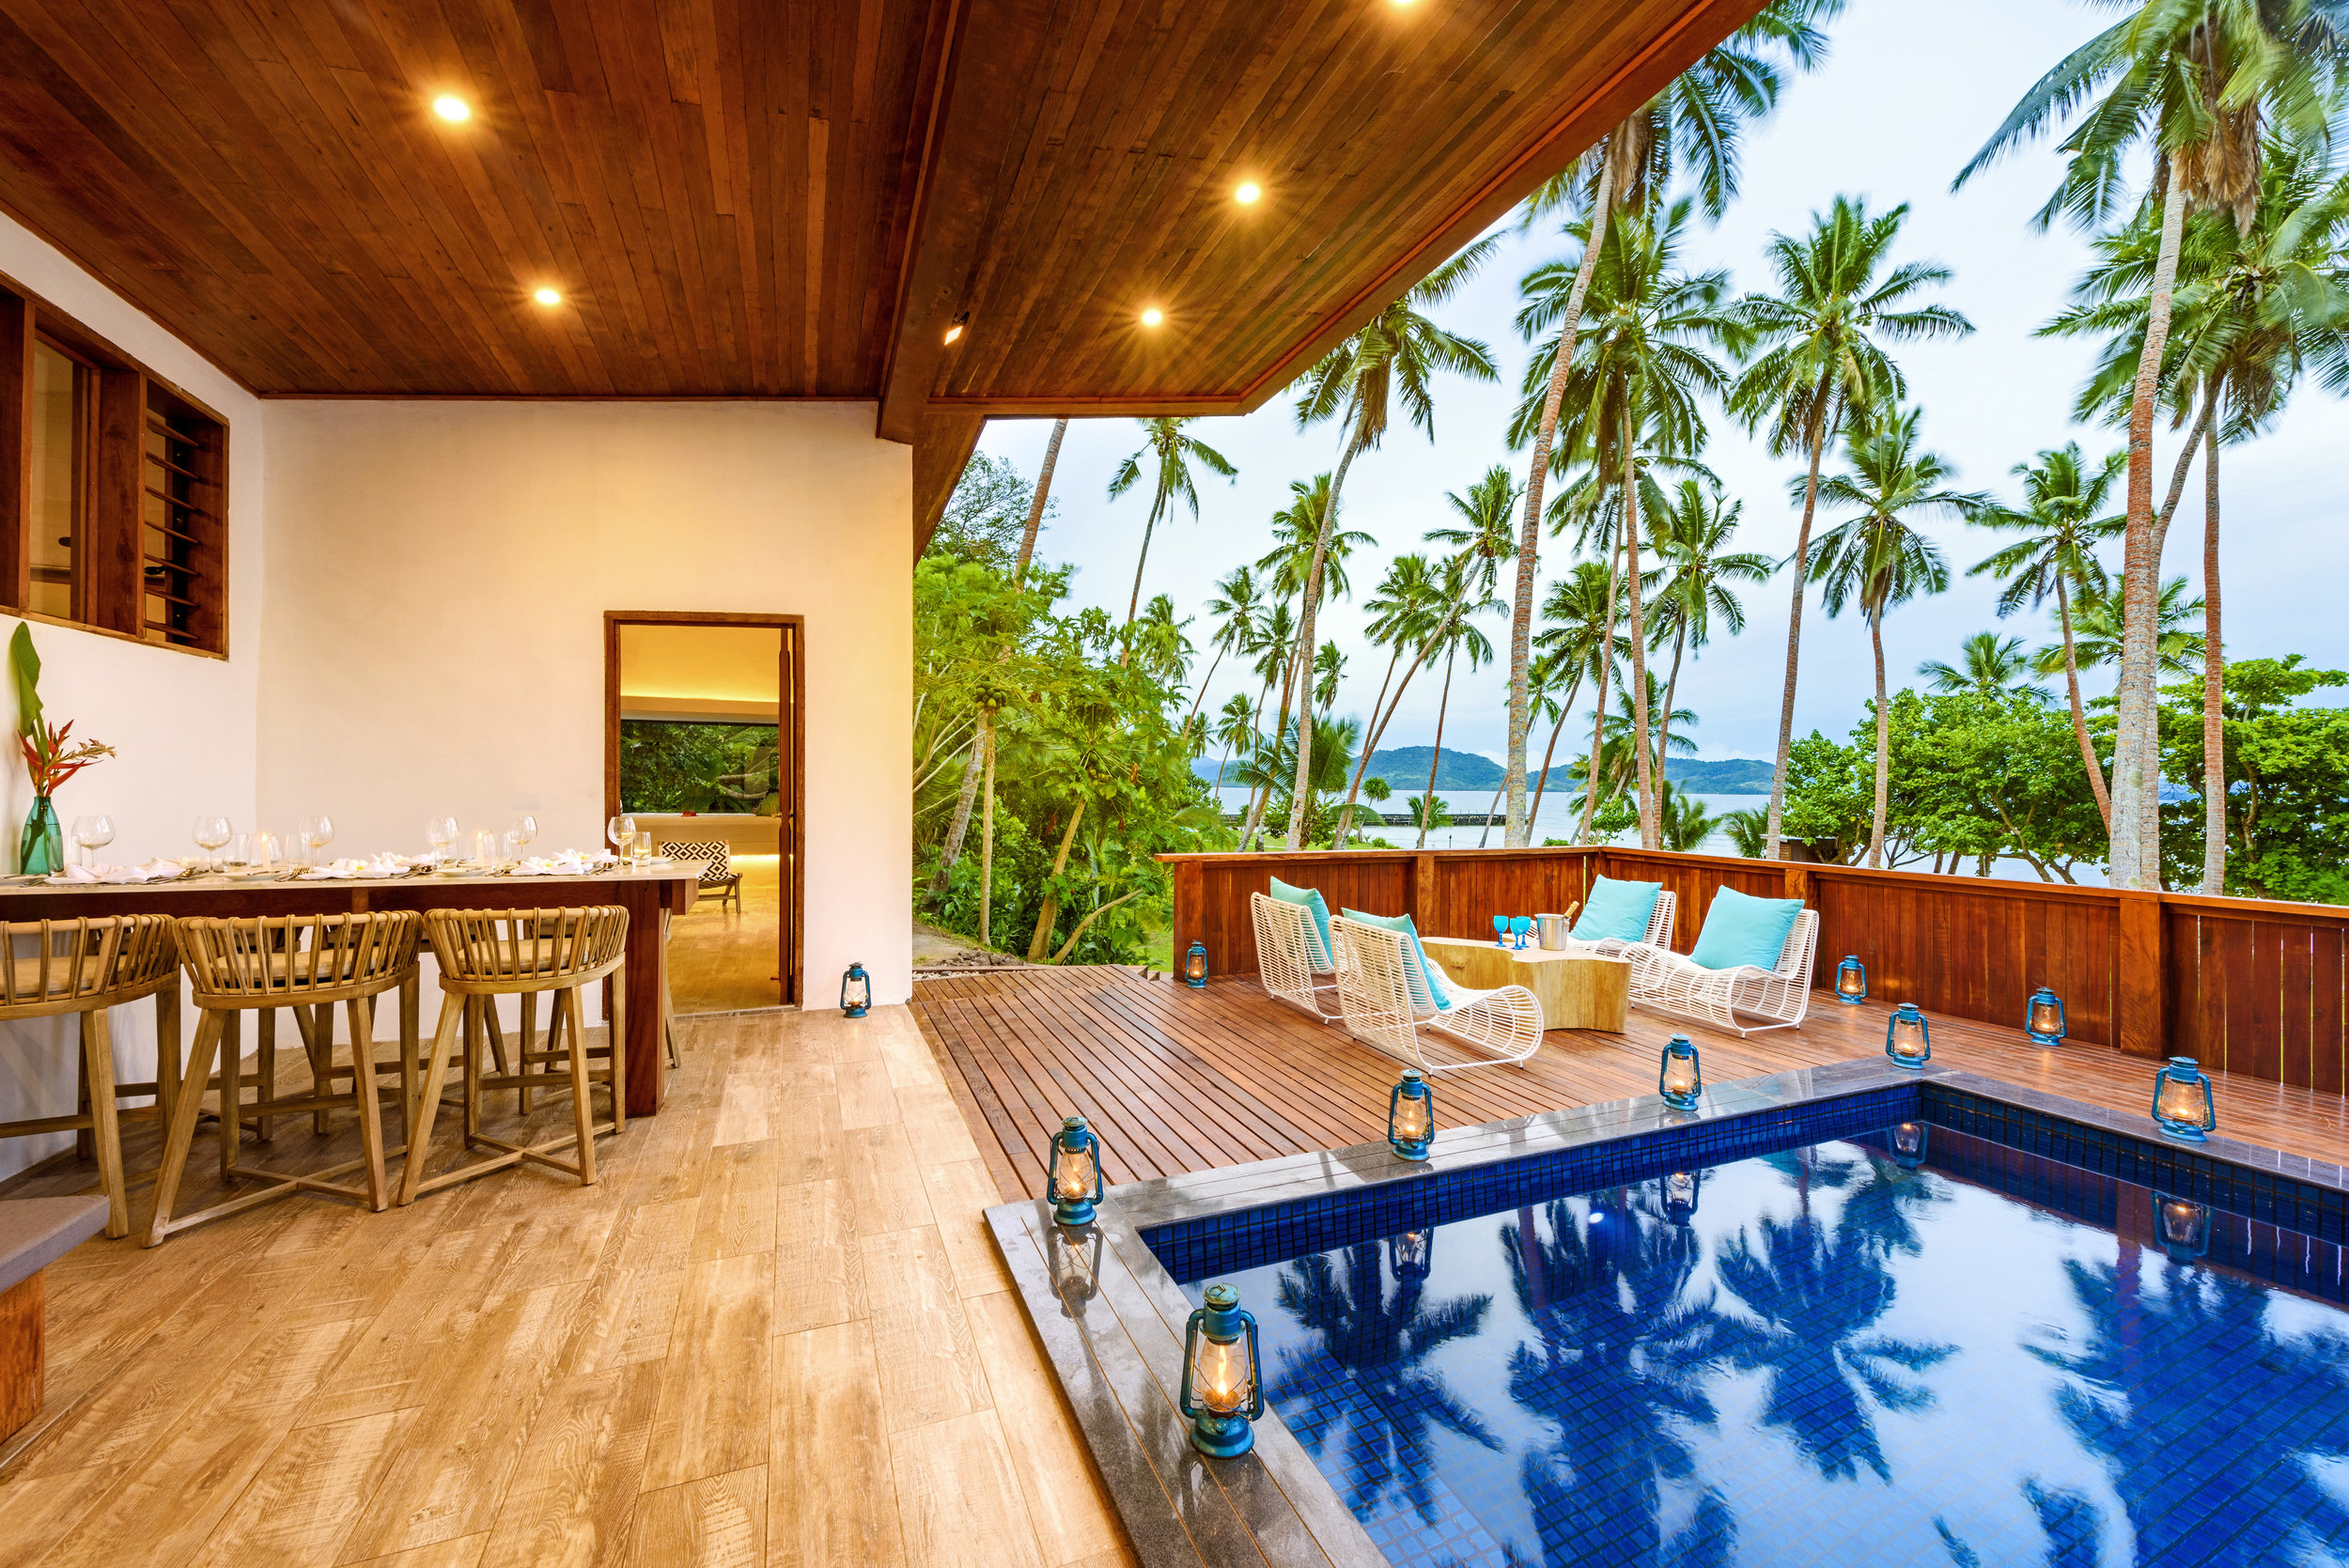 Two-Bedroom Royal Retreat plunge pool on the deck with a great view of the Ocean, The Remote Resort Fiji Islands